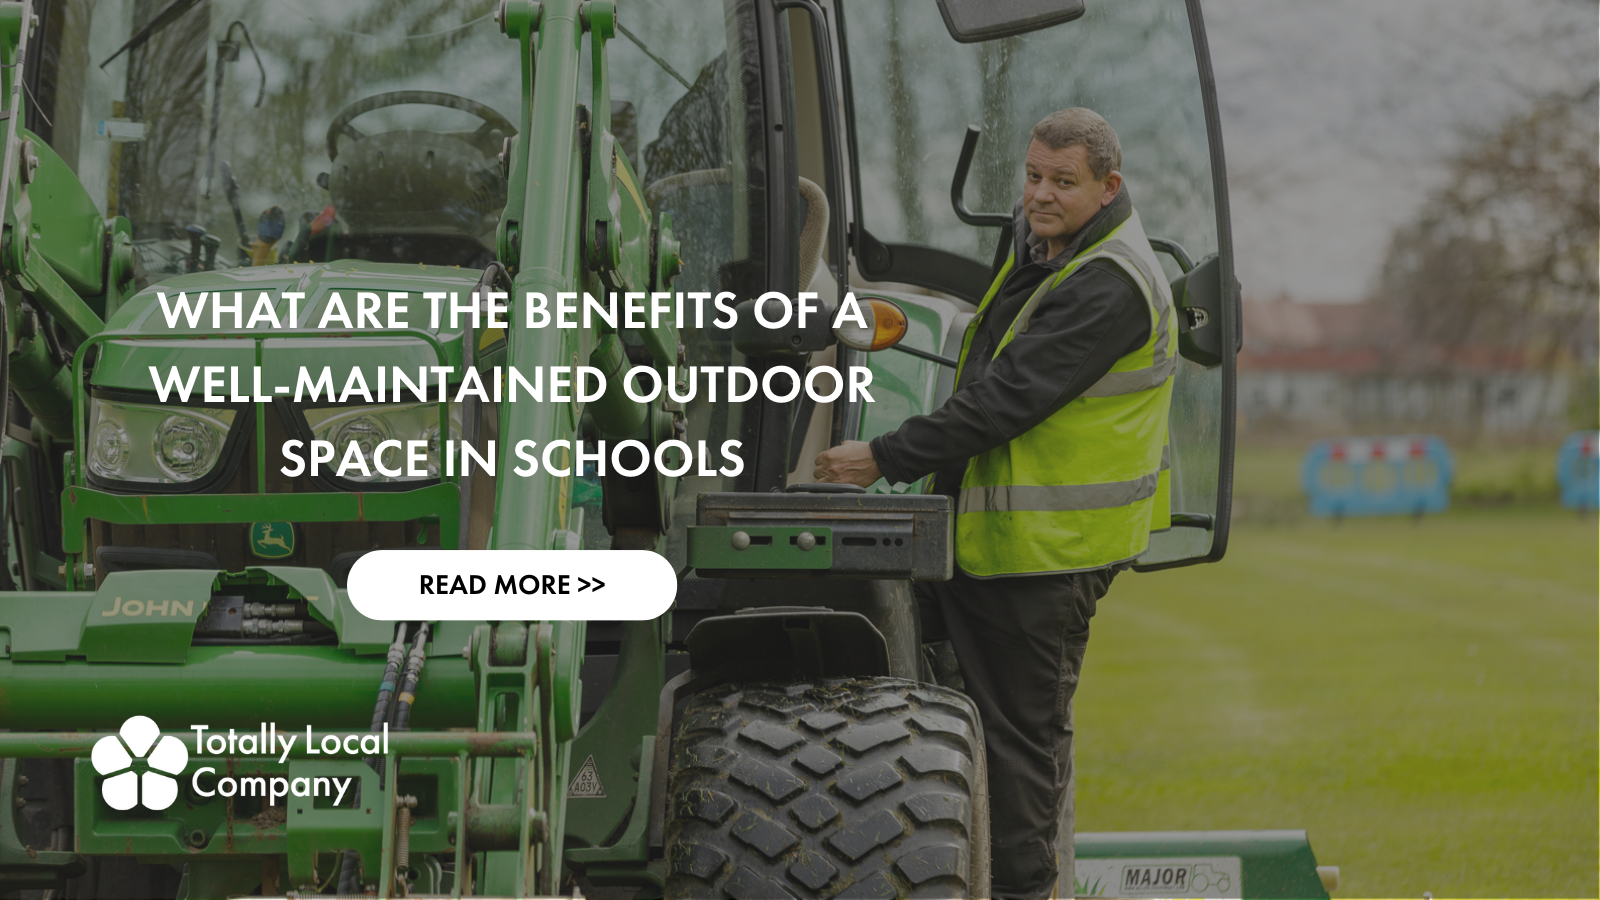 What Are the Benefits of a Well-Maintained Outdoor Space in Schools